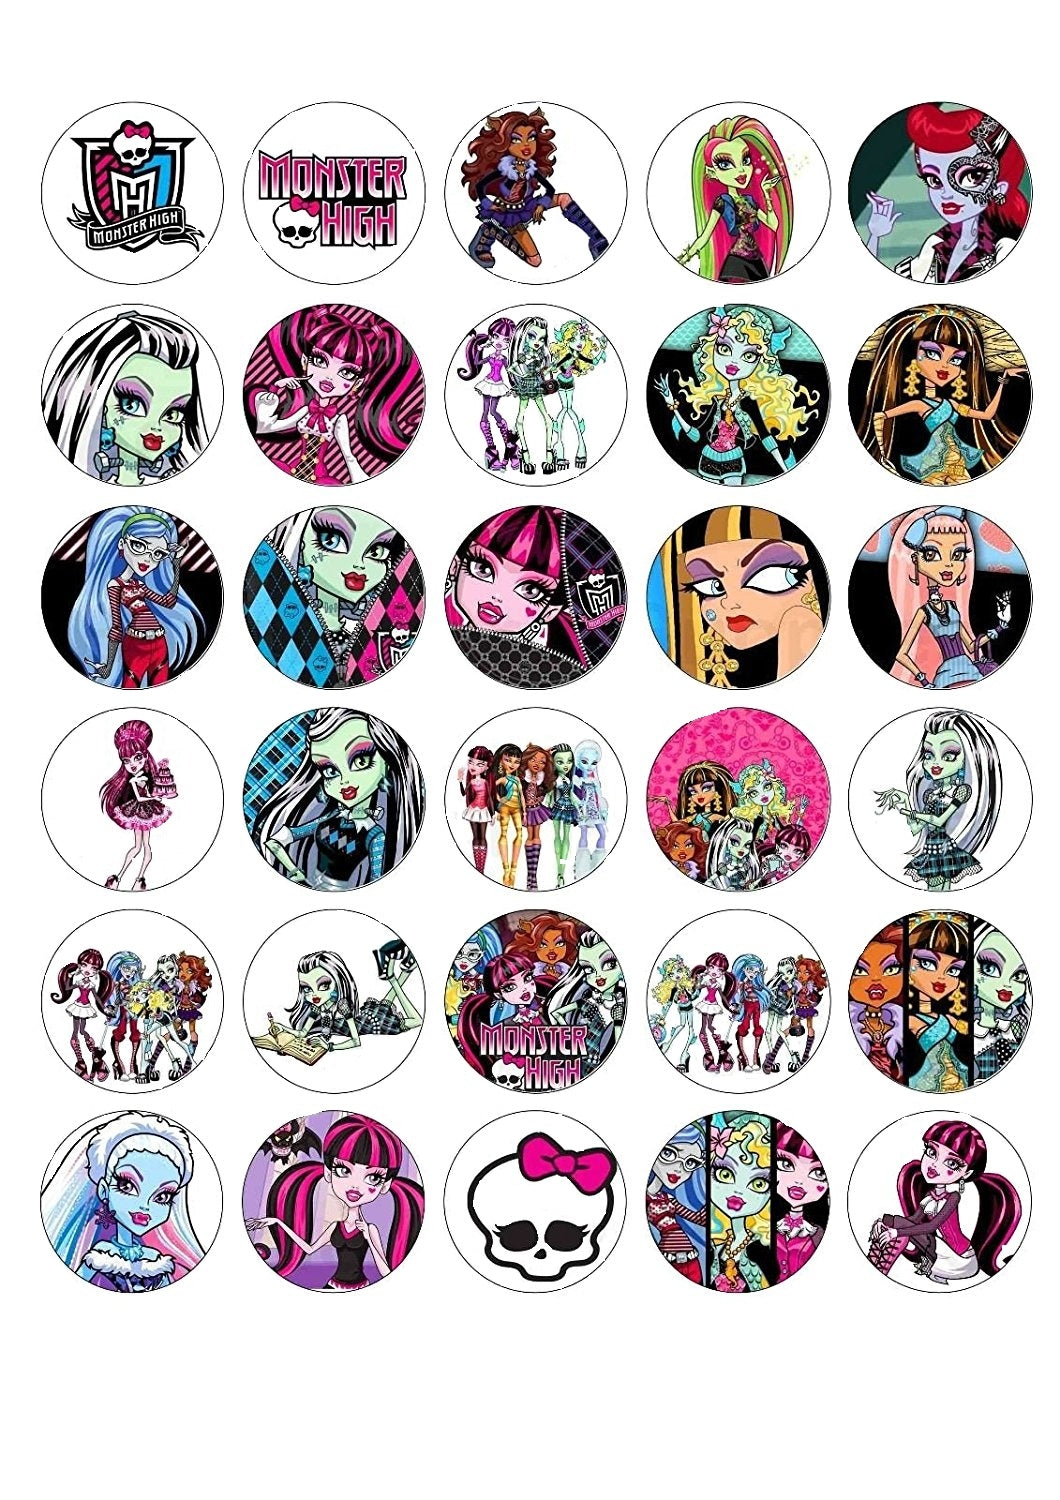 Monster High Clawdeen Wolf Lagoona Blue Cleo De Nile Draculaura Frankie Stein and Ghoulia Yelps Edible Cupcake Topper Images ABPID03438